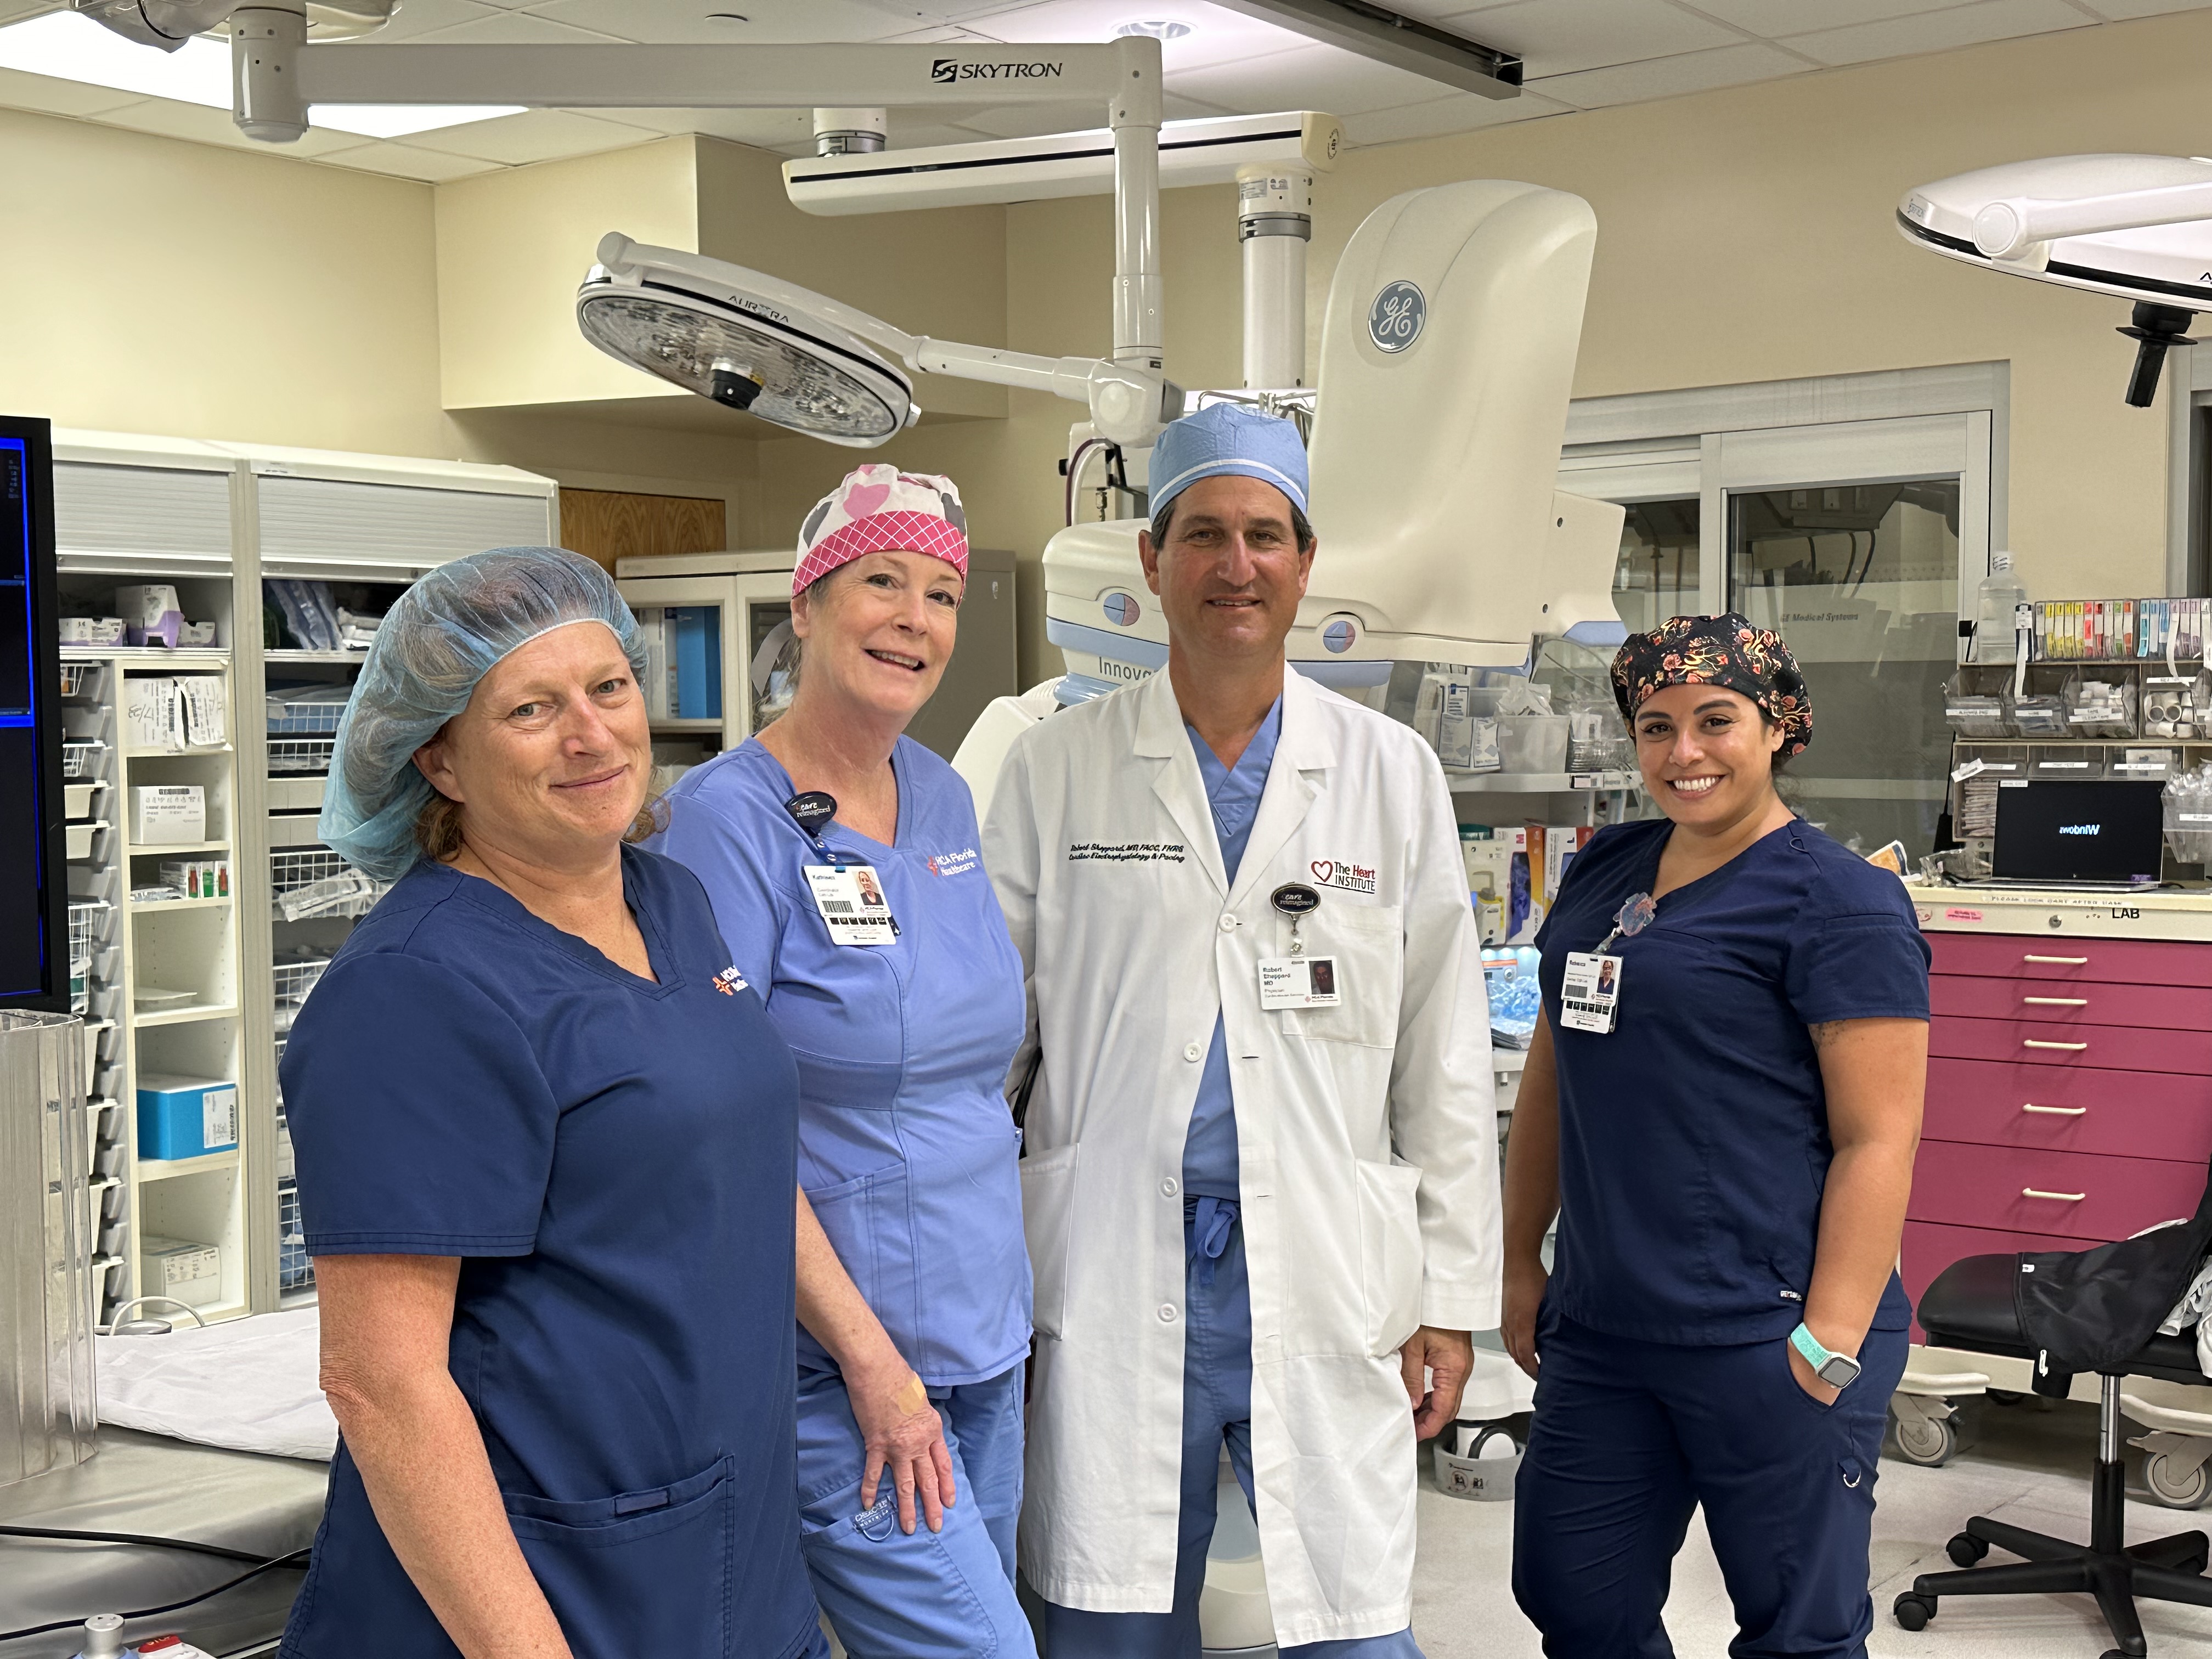 Dr. Sheppard poses with some of the EP team and a surgical robot after the first new A-fib procedure.